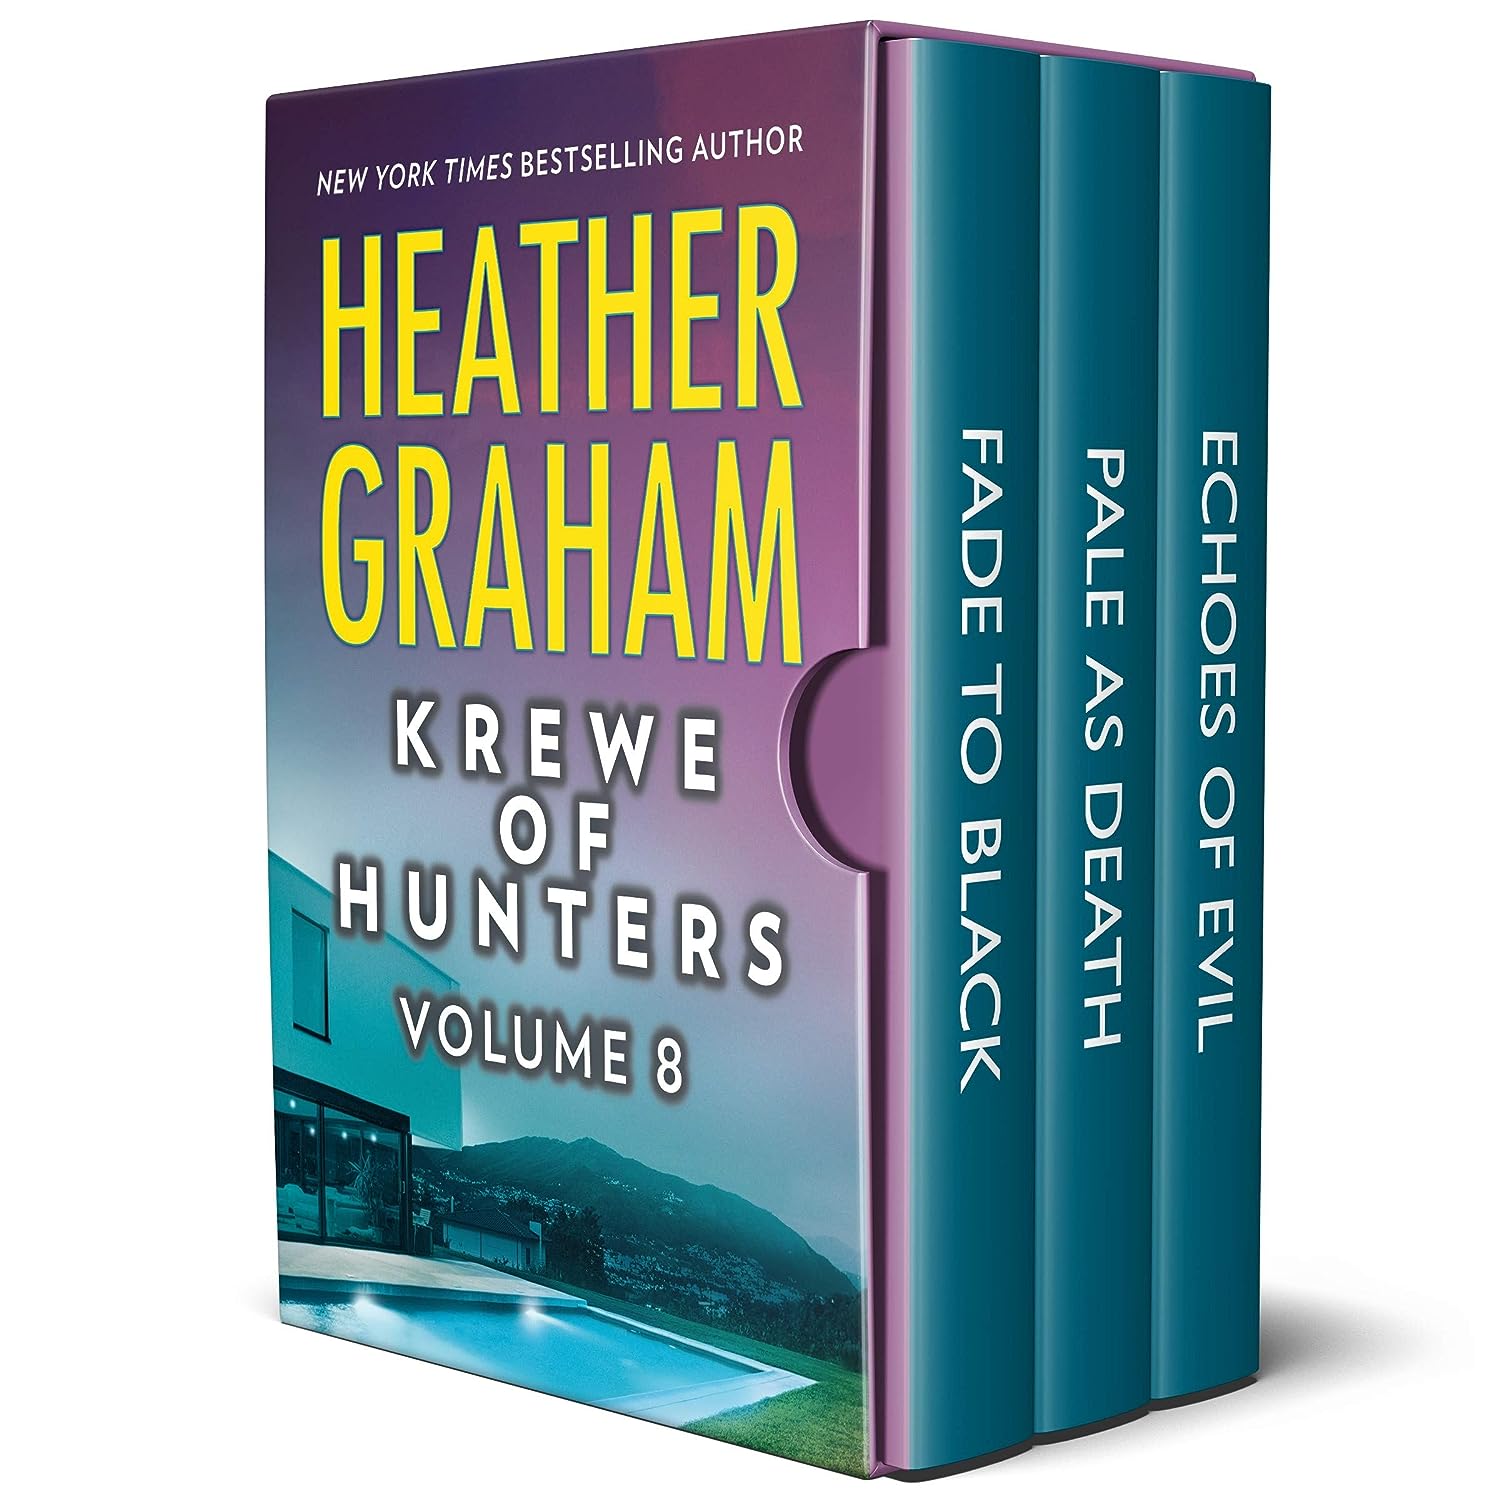 10 Best Heather Graham Kindle Books for 2023